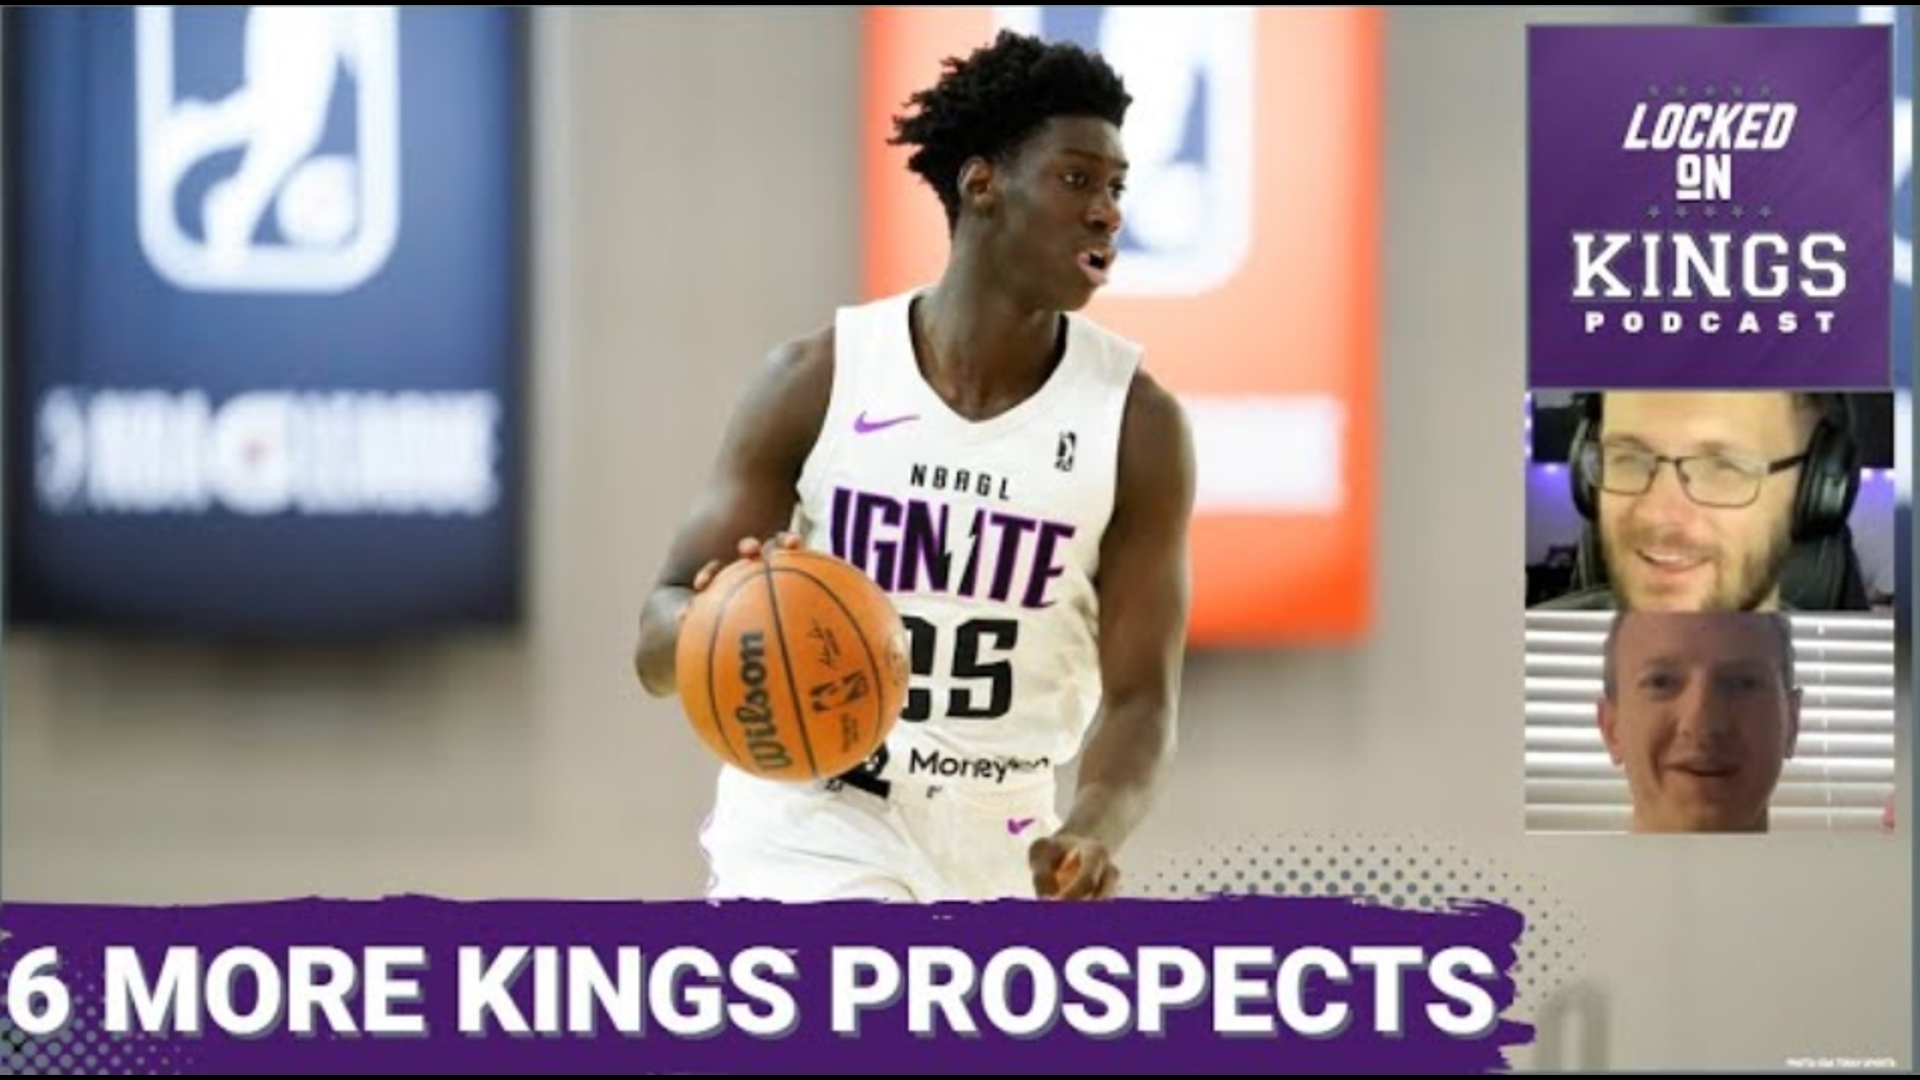 Richard Stayman, from Locked On NBA Big Board,  breaks down six more prospects that the Sacramento Kings should have their eye on with the 24th pick.